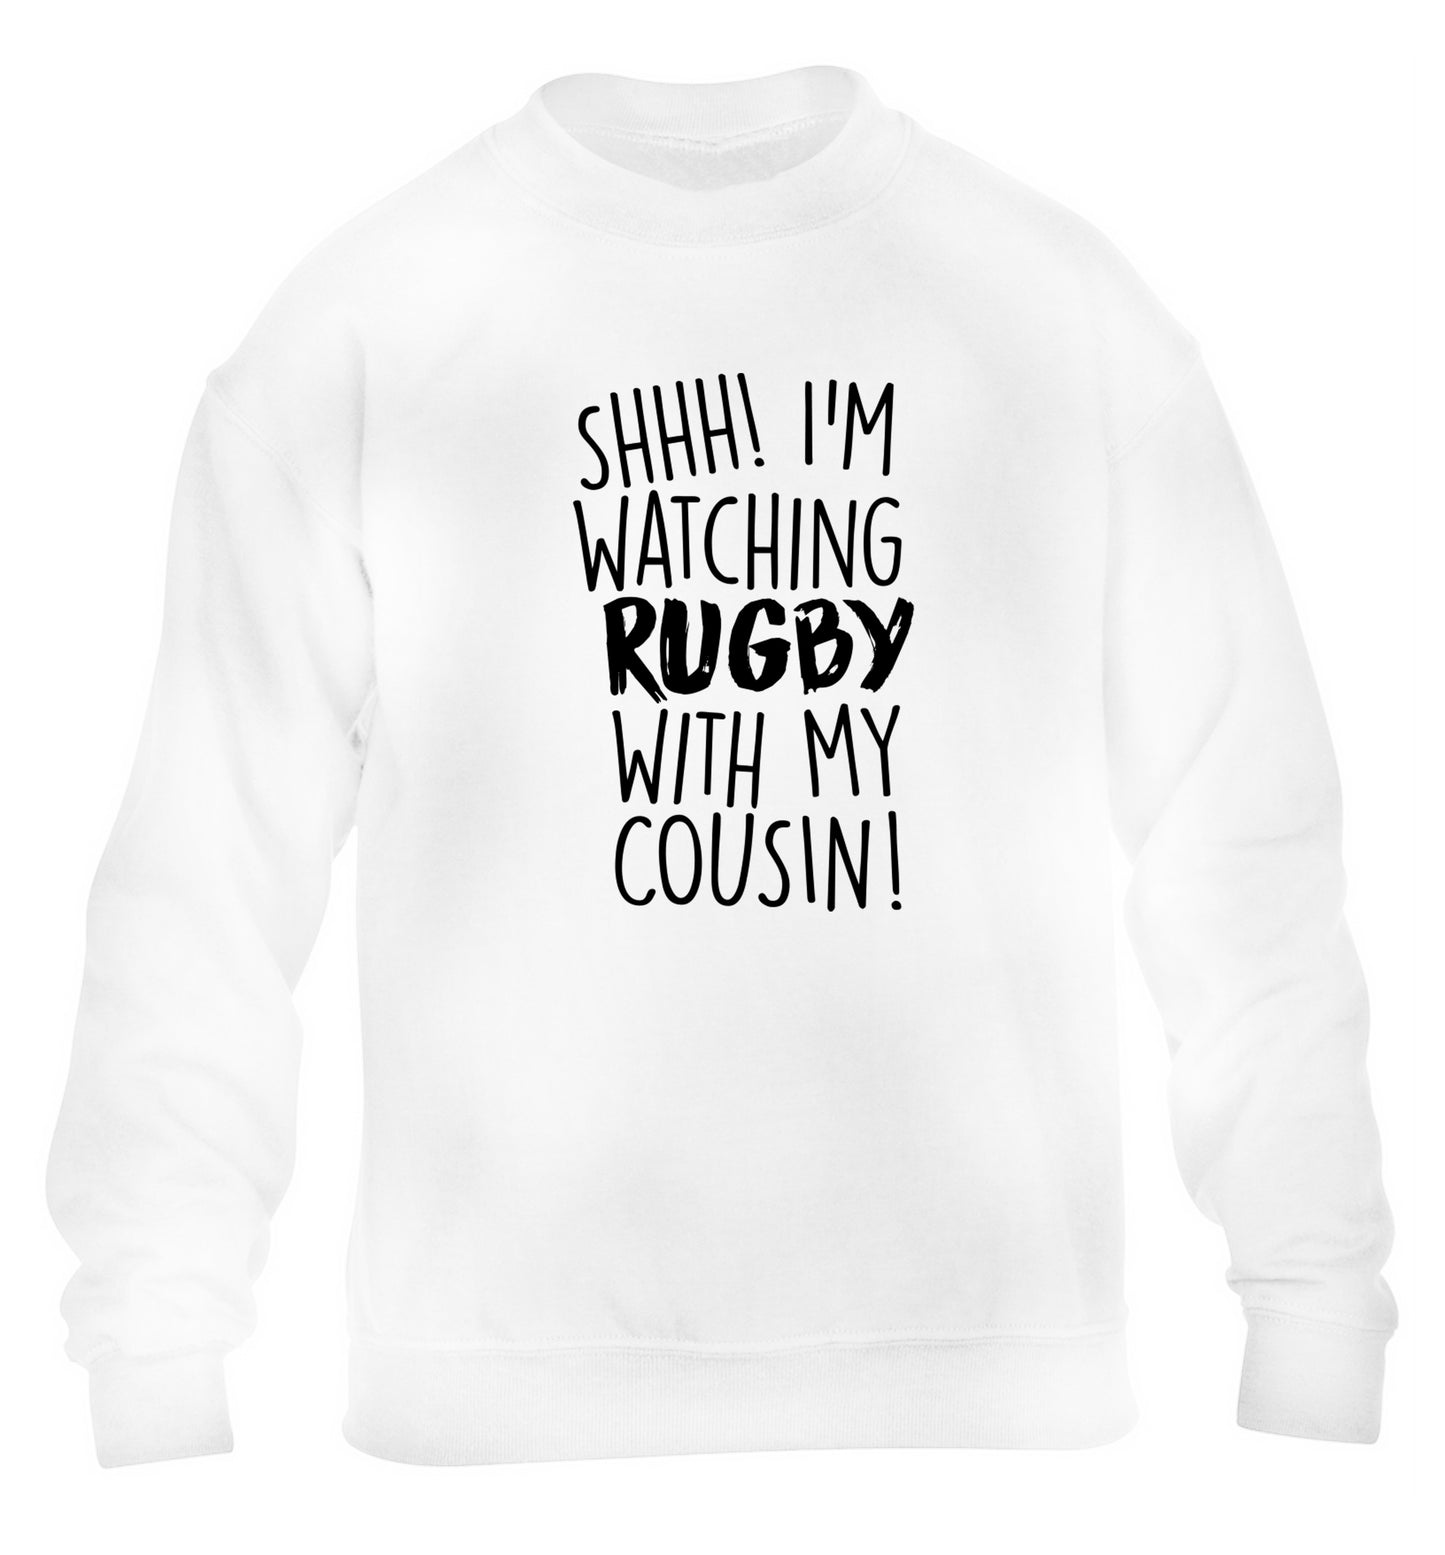 Shhh I'm watching rugby with my cousin children's white sweater 12-13 Years